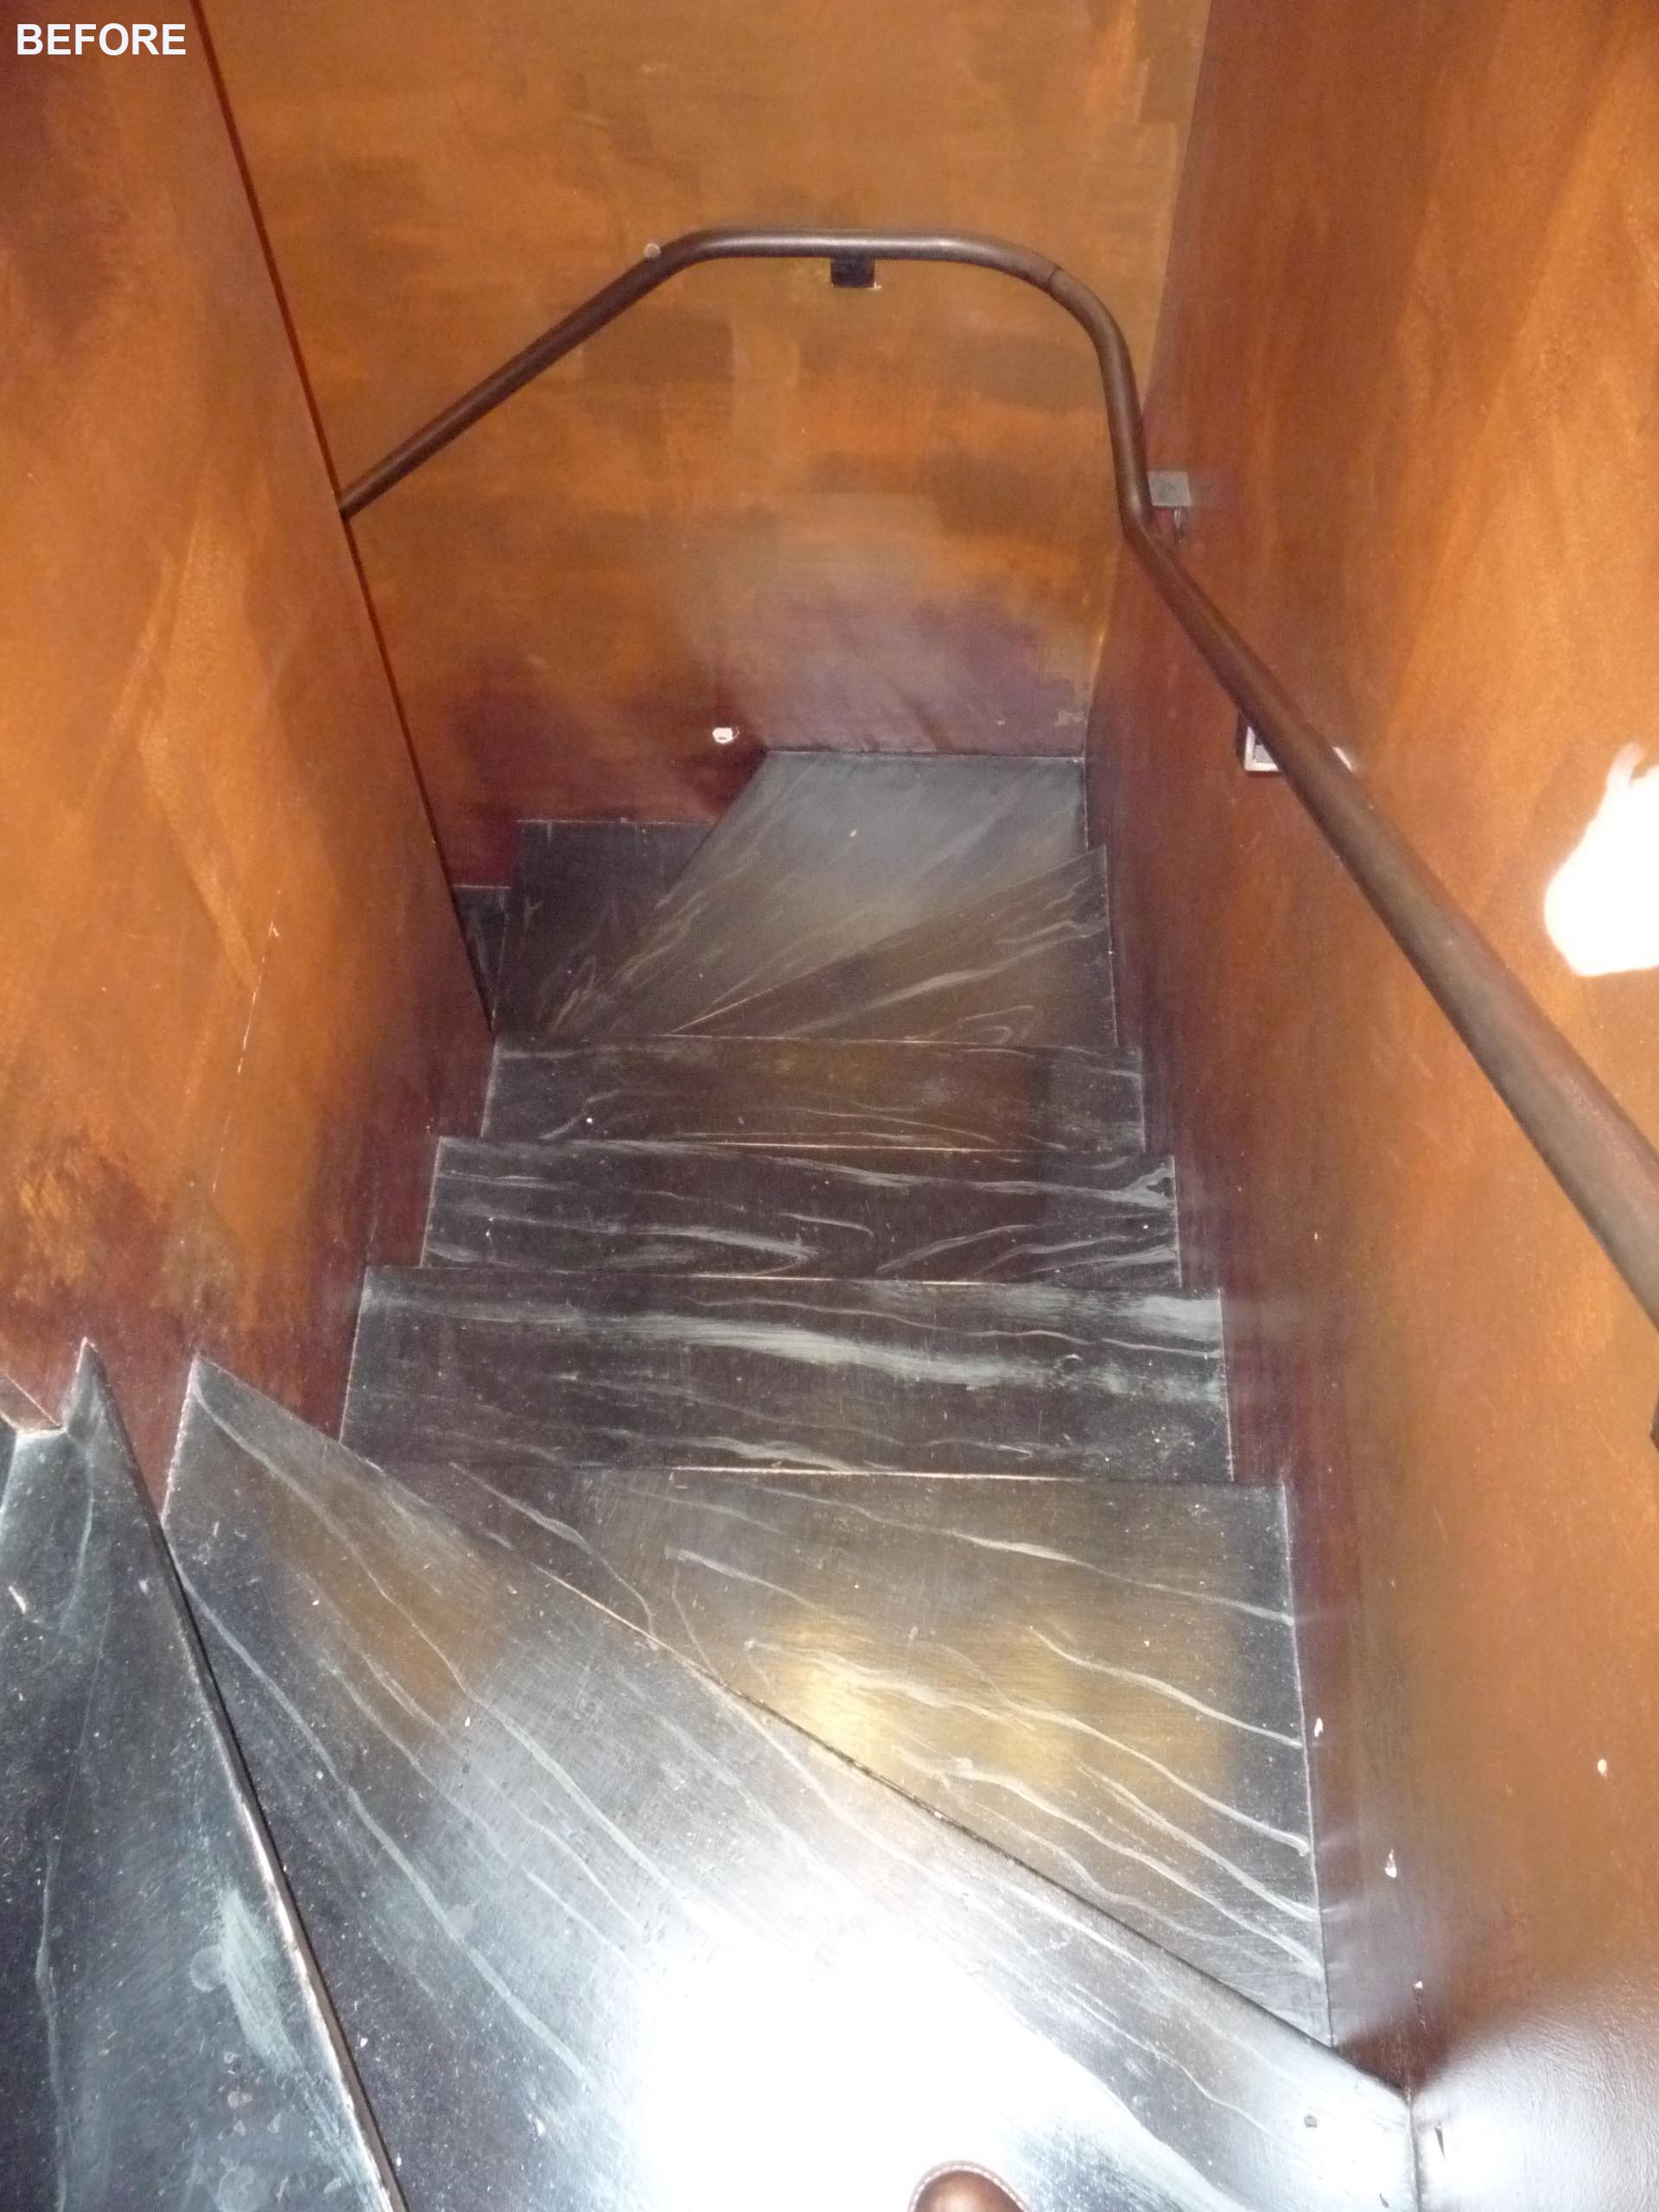 A metal staircase before it was remodeled.